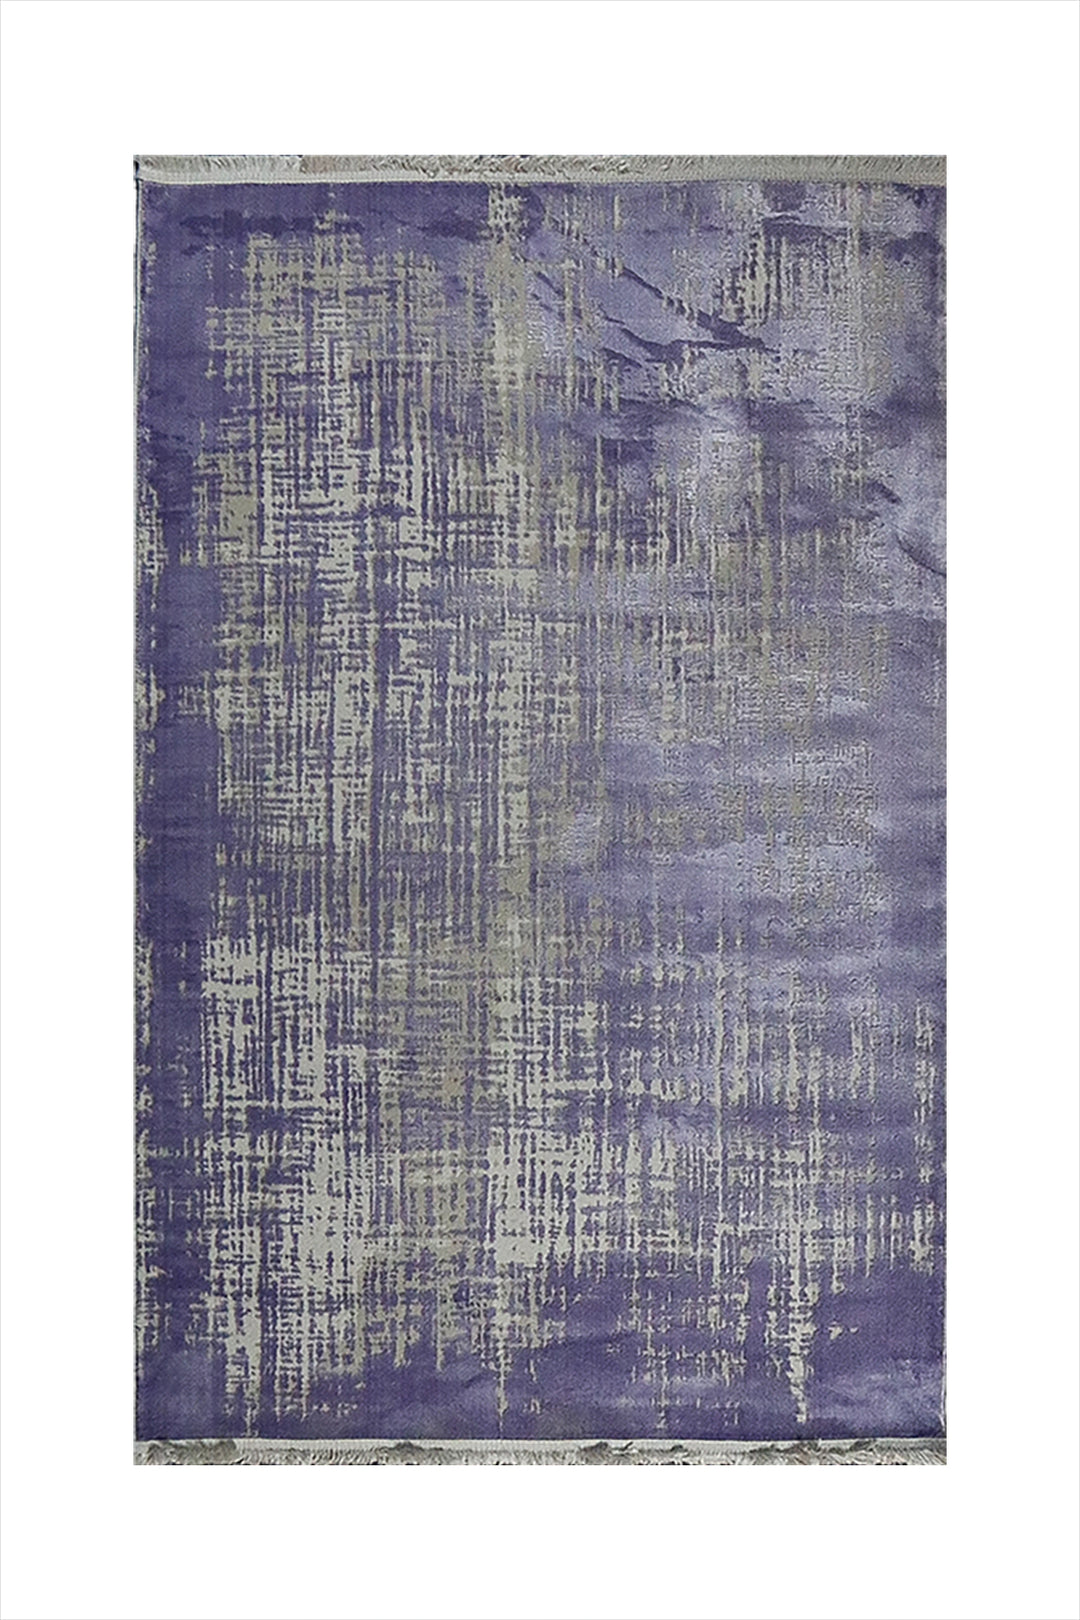 Turkish Modern Festival 1 Rug -  3.93 x 5.90 FT - Gray and Blue -  Superior Comfort, Modern Style Accent Rugs